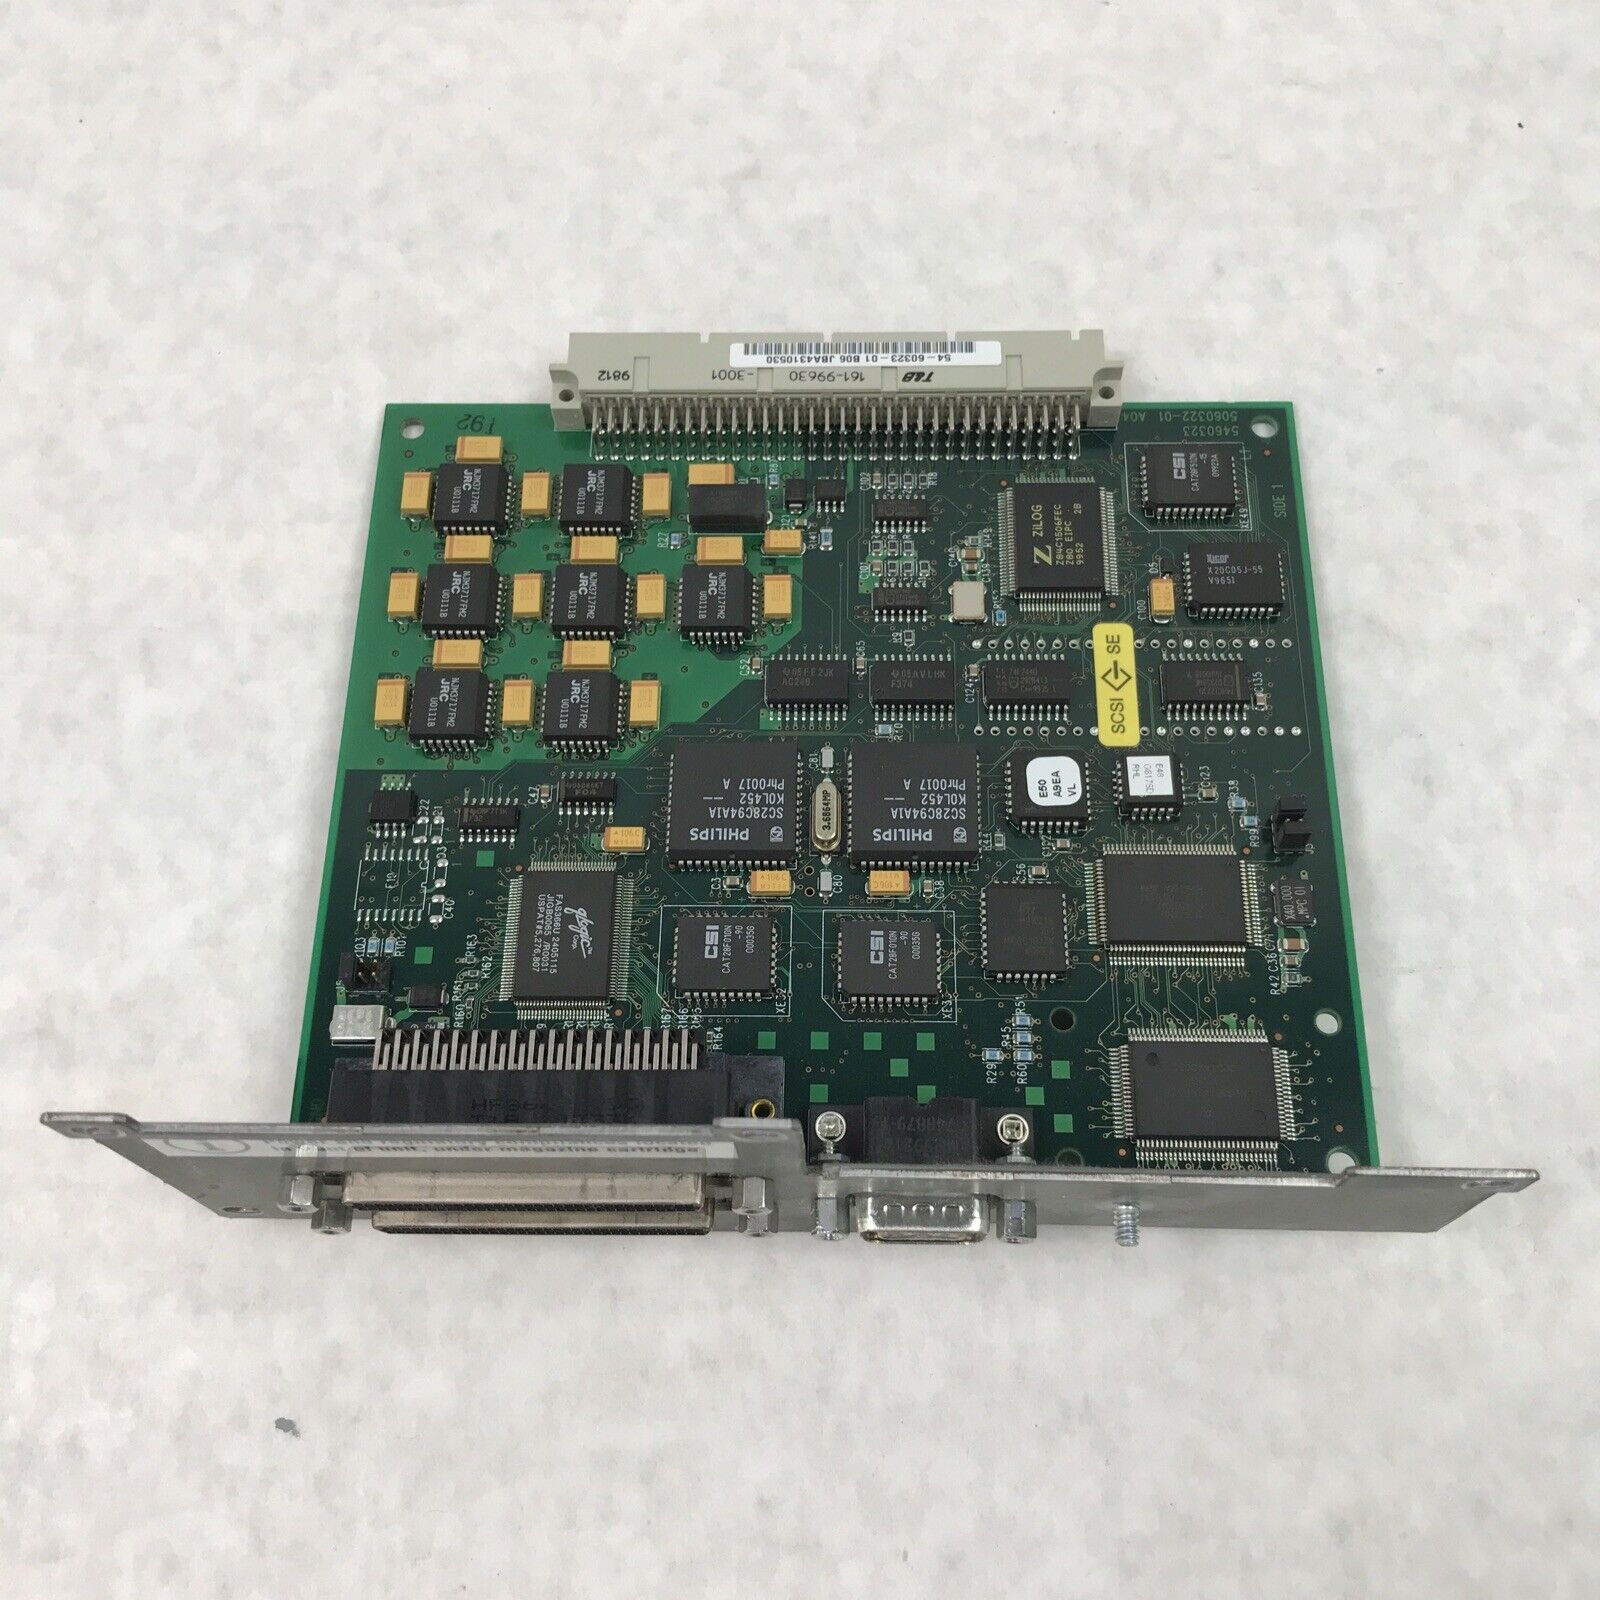 Quantum 54-60323-01 DLTstor Library interface card